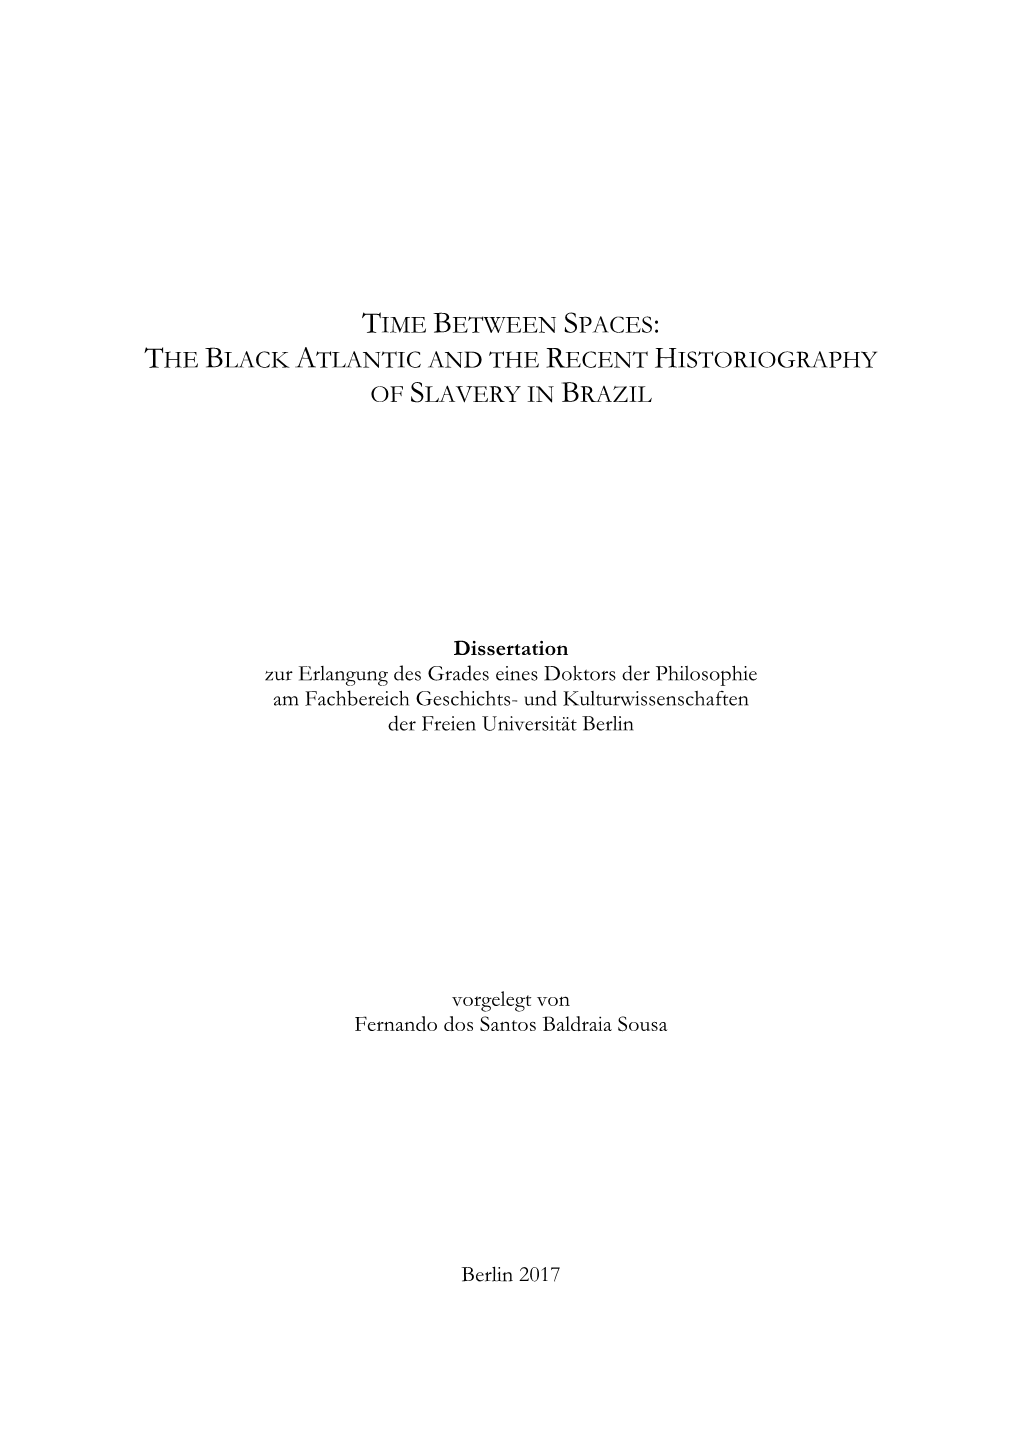 The Black Atlantic and the Recent Historiography of Slavery in Brazil